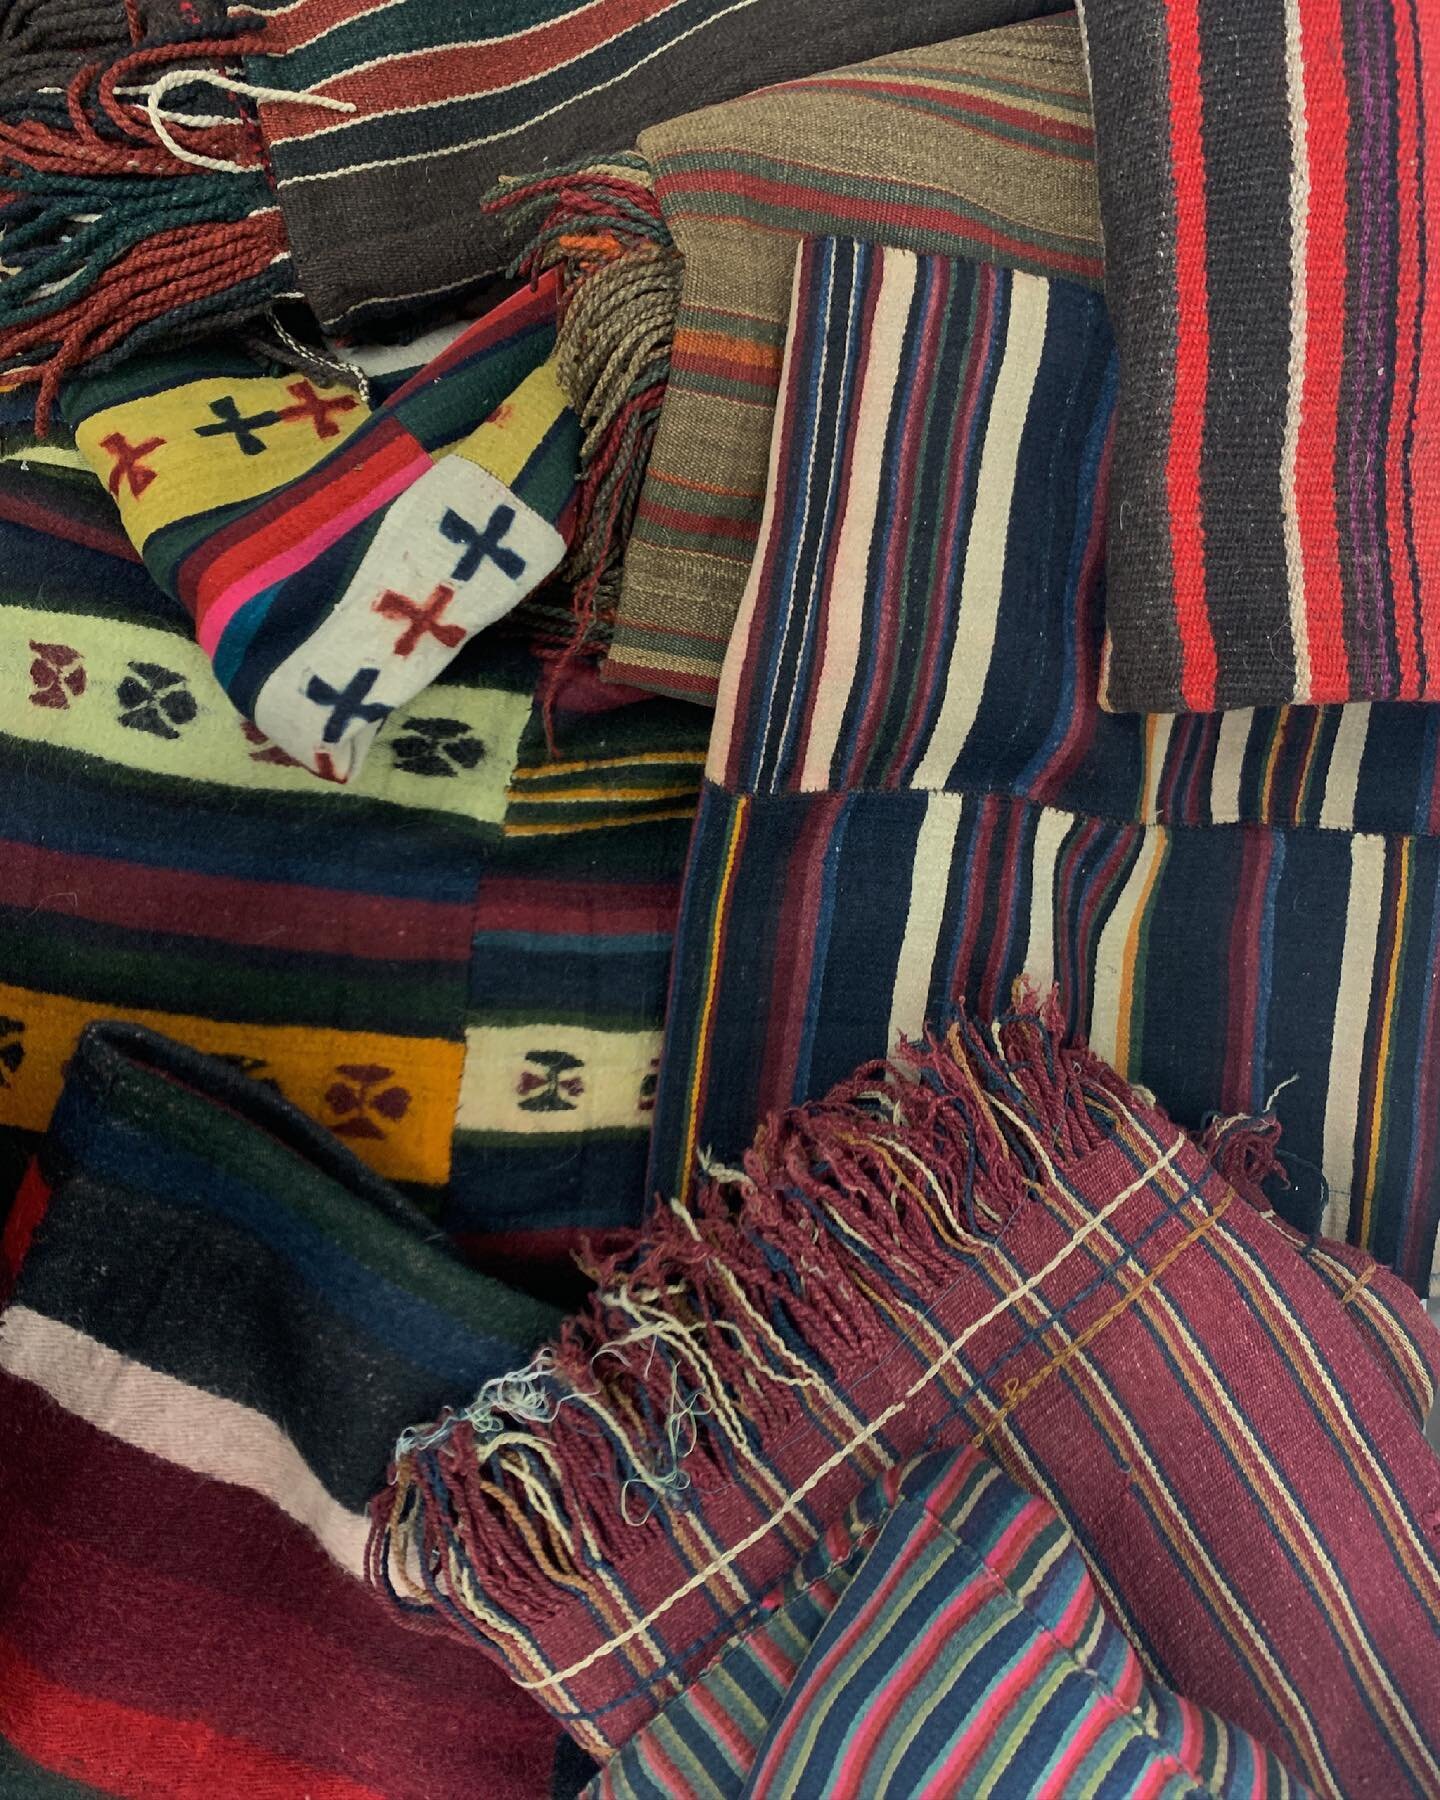 Unpacking an auction haul of Tibetan wool blankets and textiles!